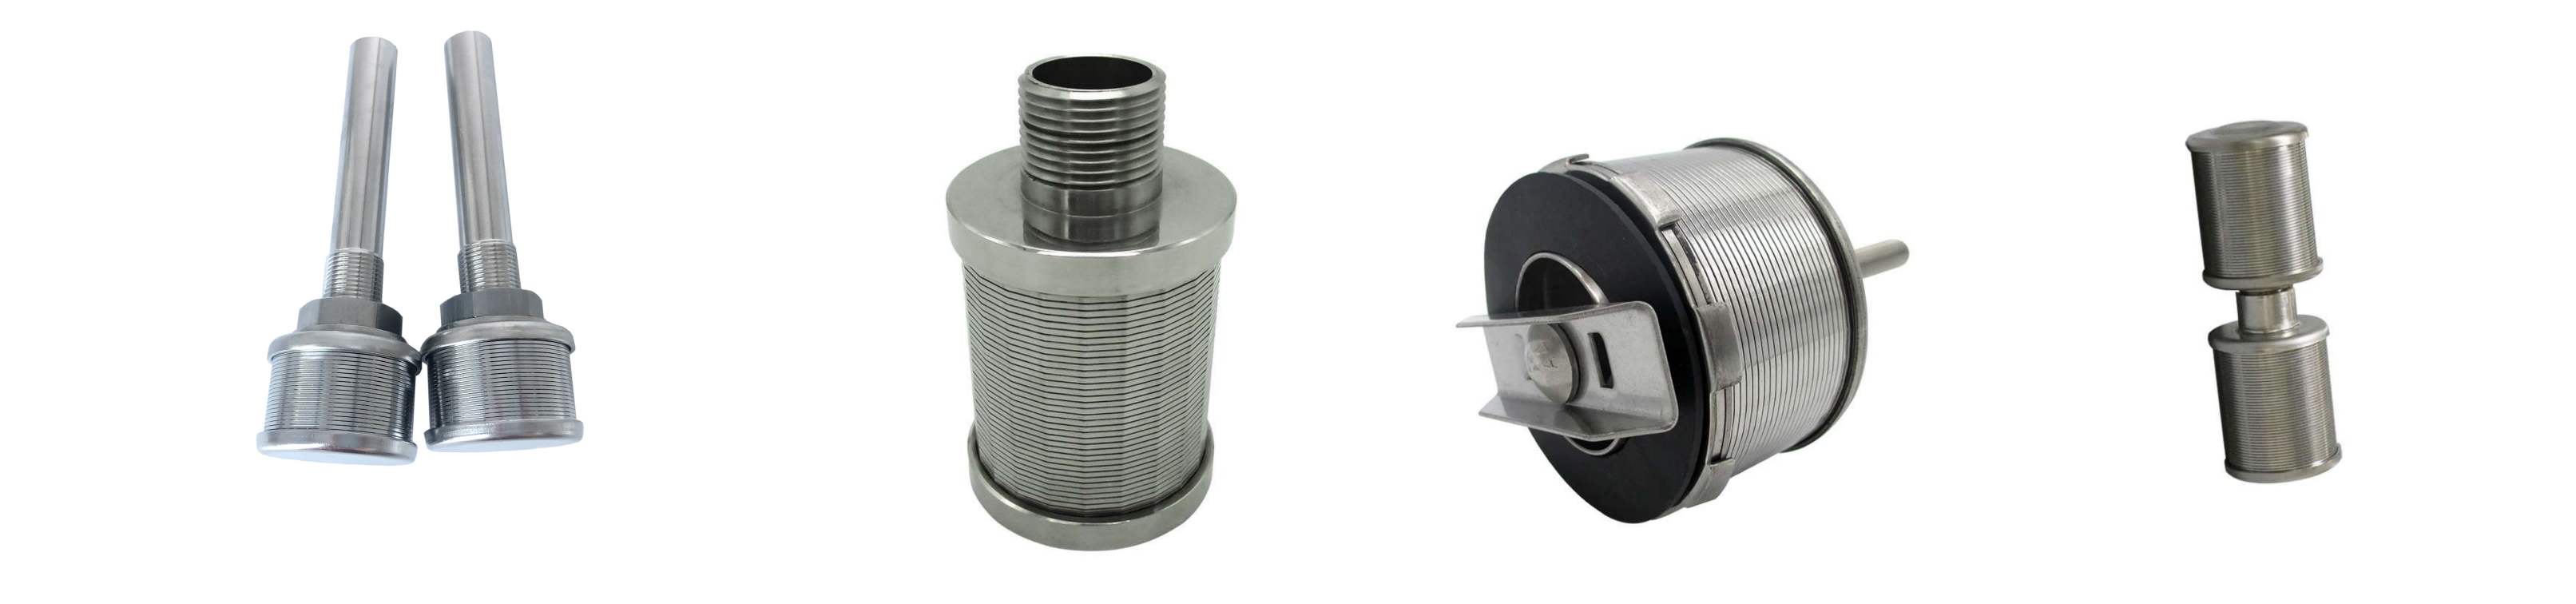 Stainless steel water Filter Nozzle